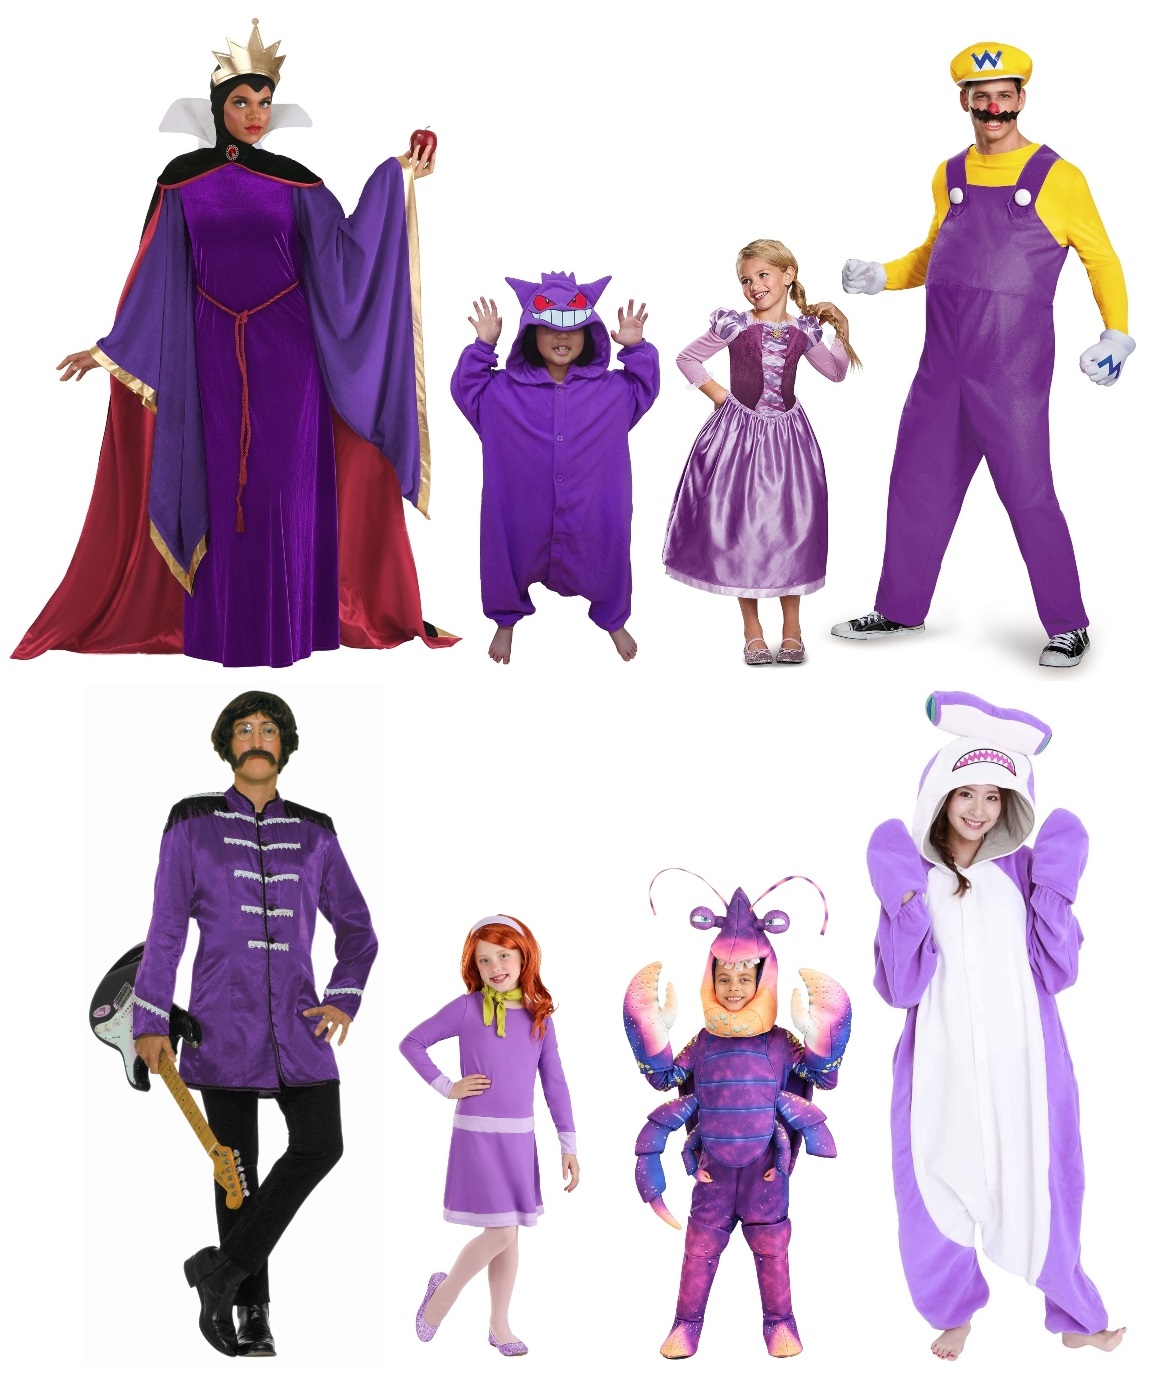 Colorful Costume Ideas for a Spectrum of Fun [Costume Guide